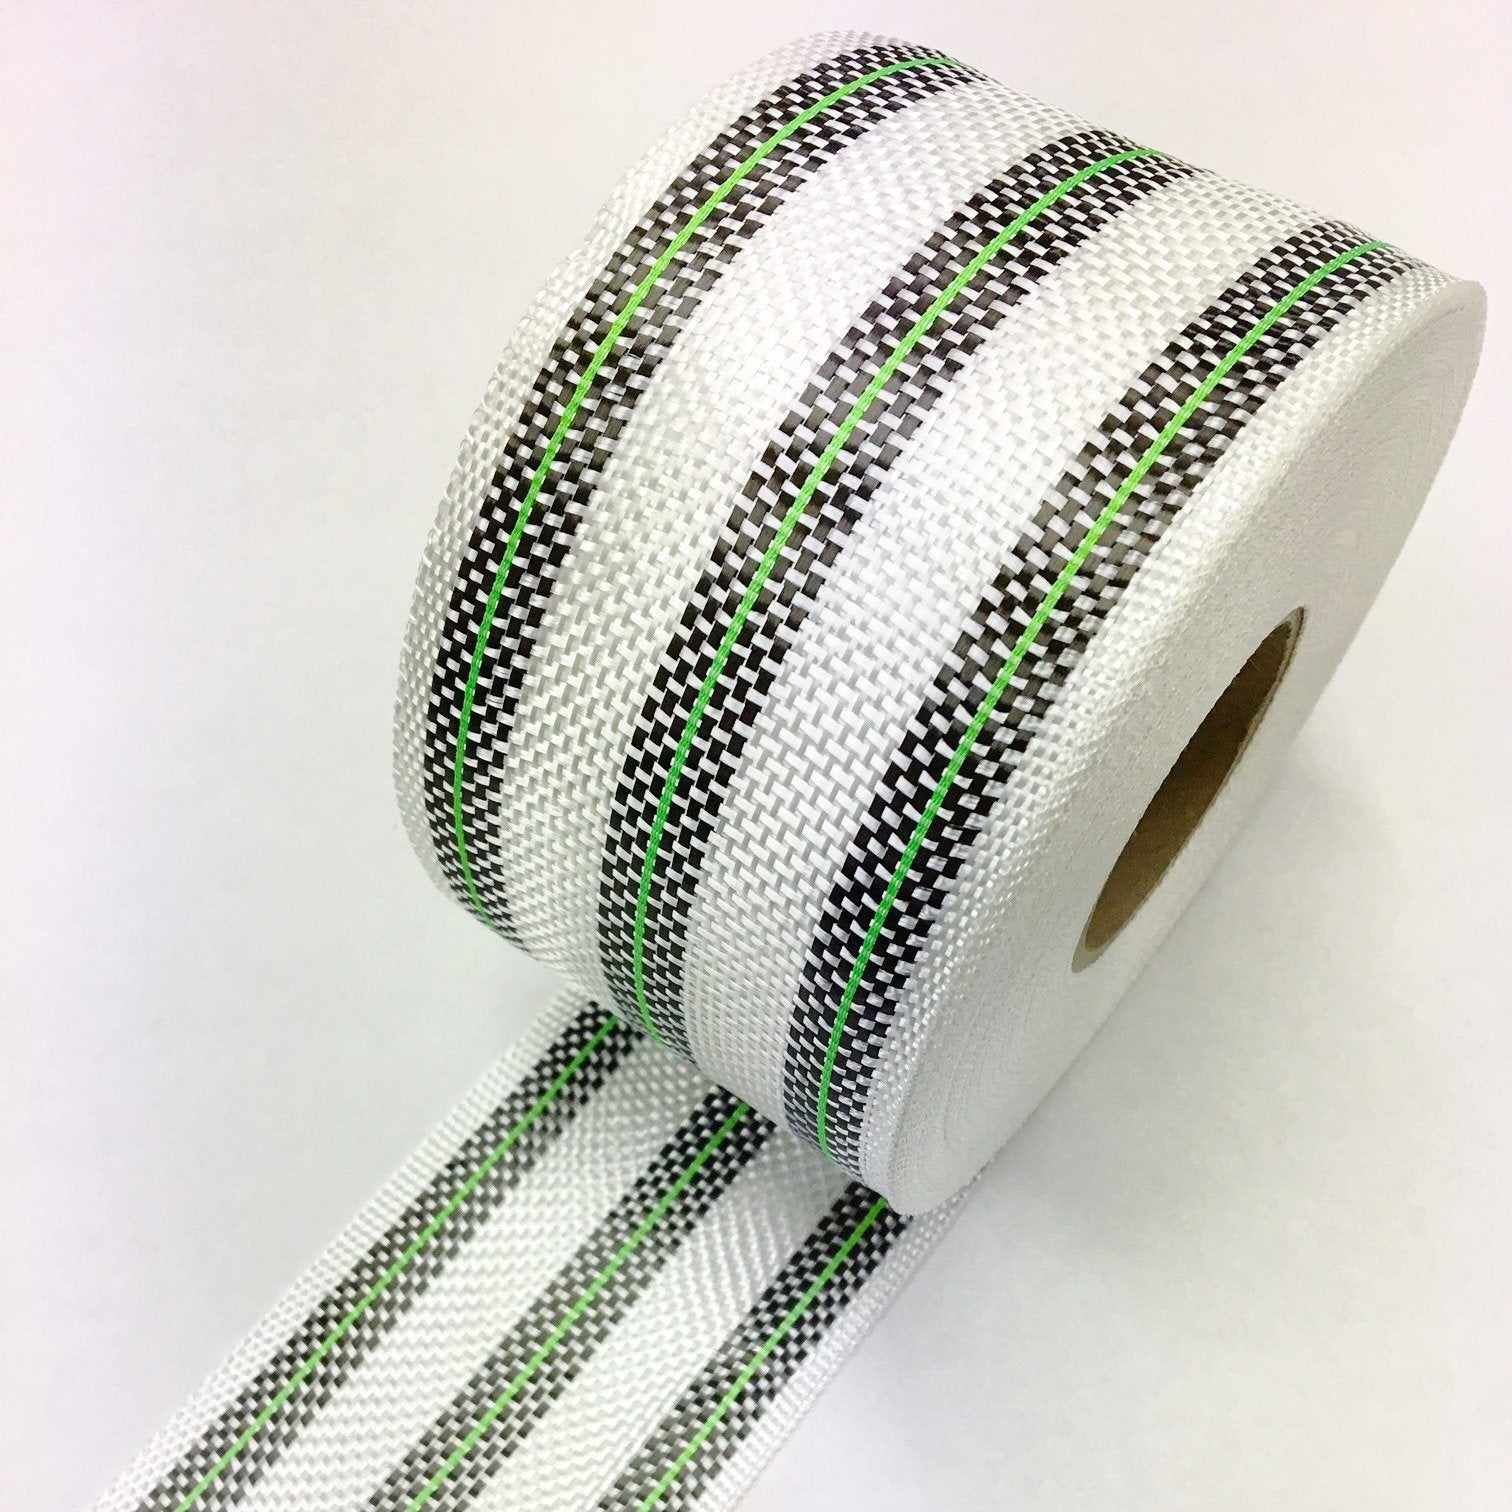 3 Band Carbon Rail Tape with Green insert